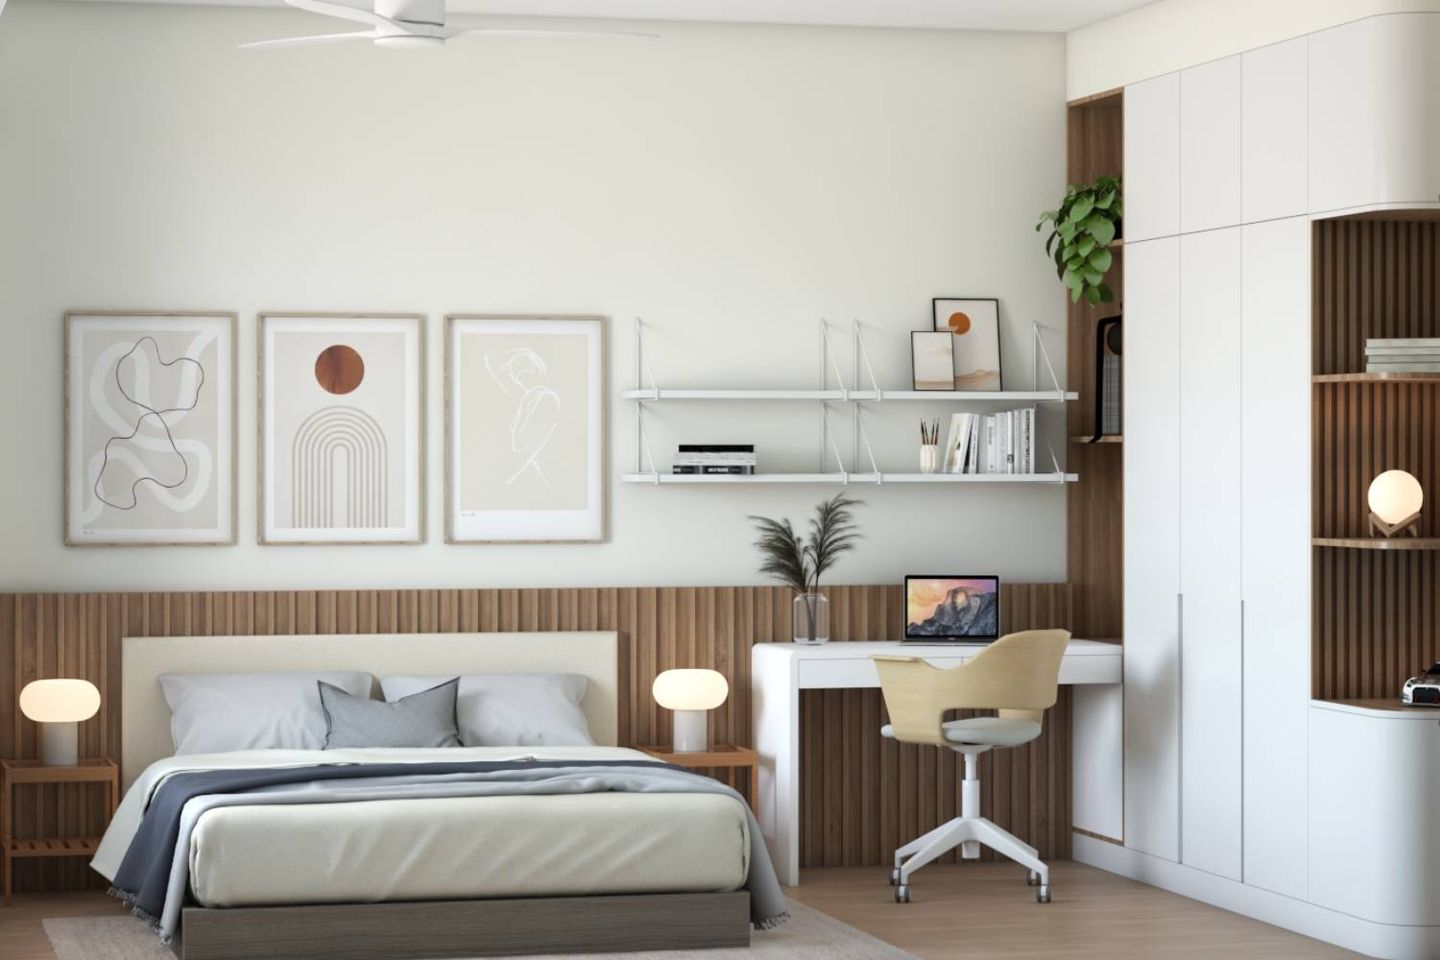 16 m² Master Bedroom Design With White And Wood Swing Wardrobe And Study Table - Livspace